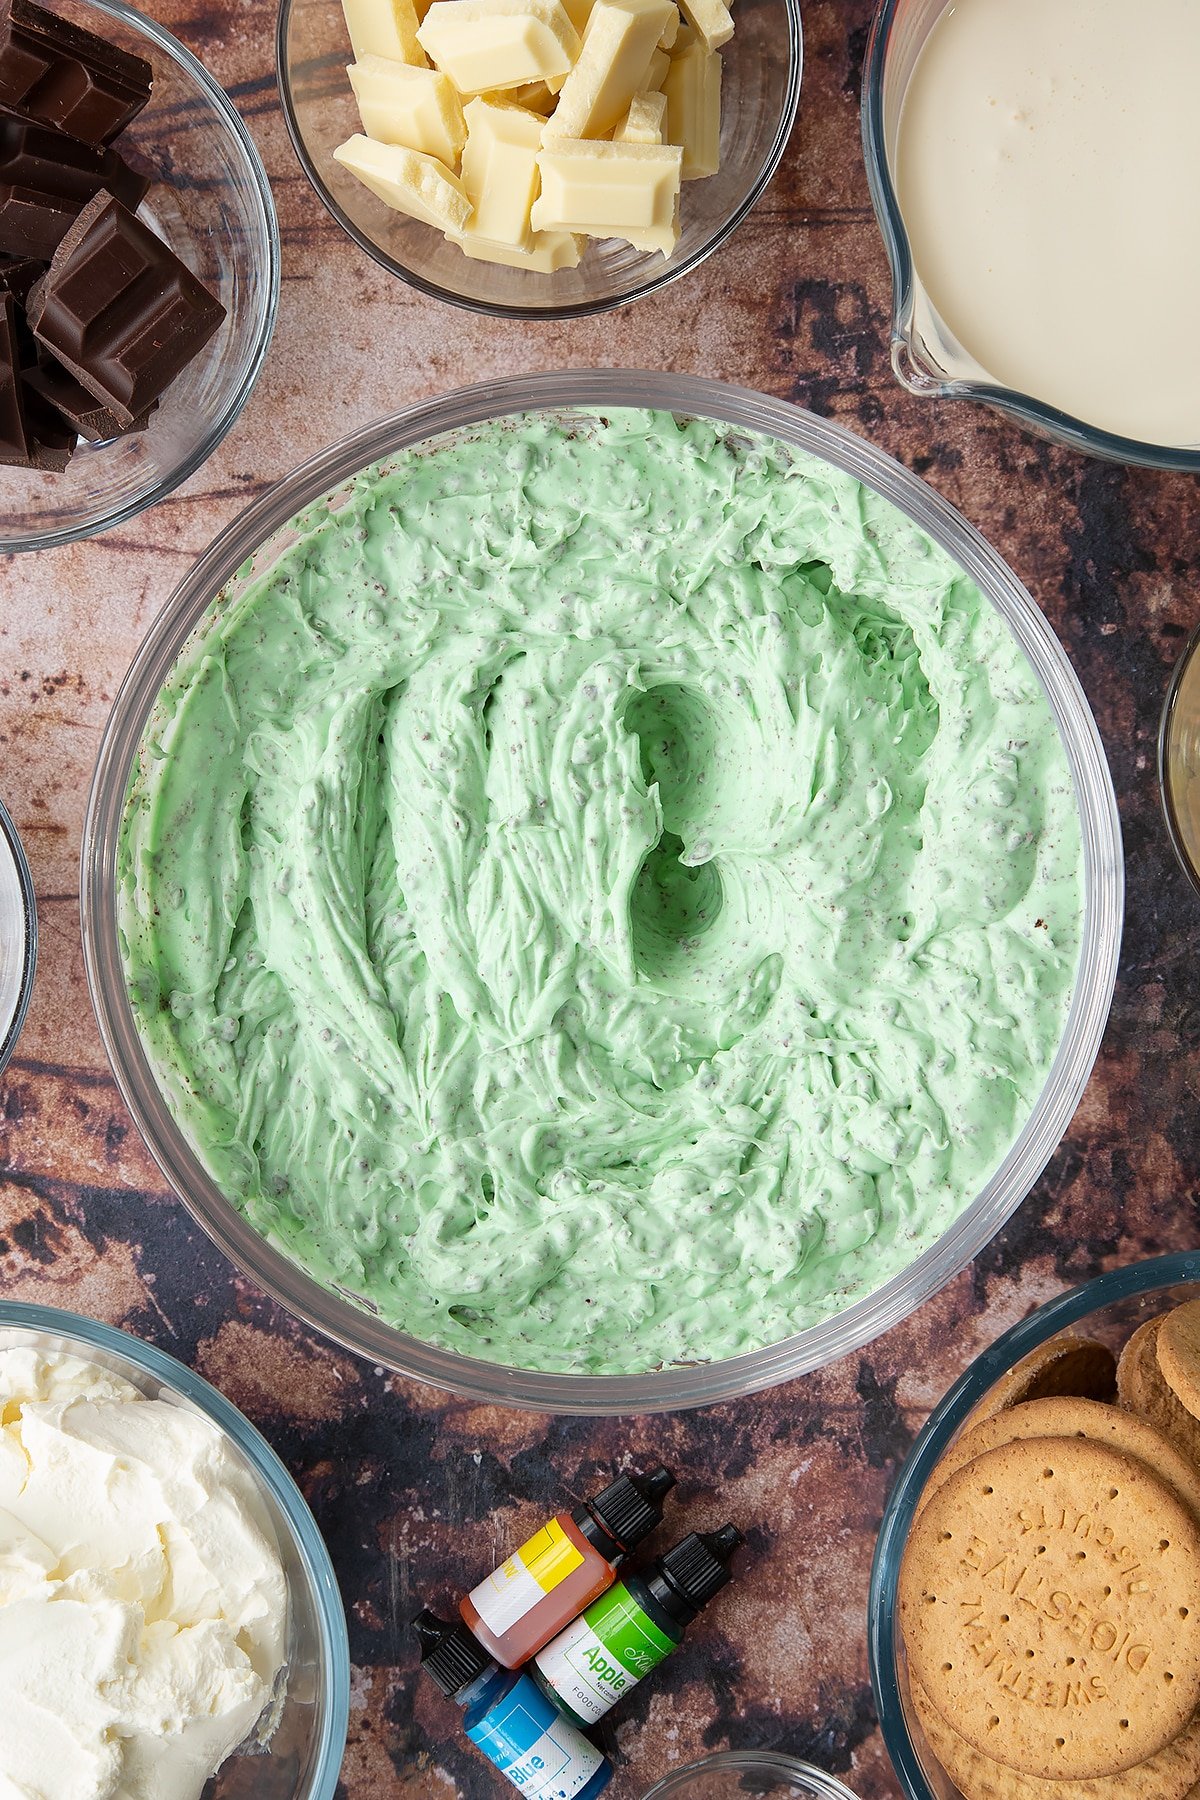 Peppermint green, chocolate chip cheesecake filling in a glass bowl. Ingredients to make no bake mint cheesecake surround the bowl.